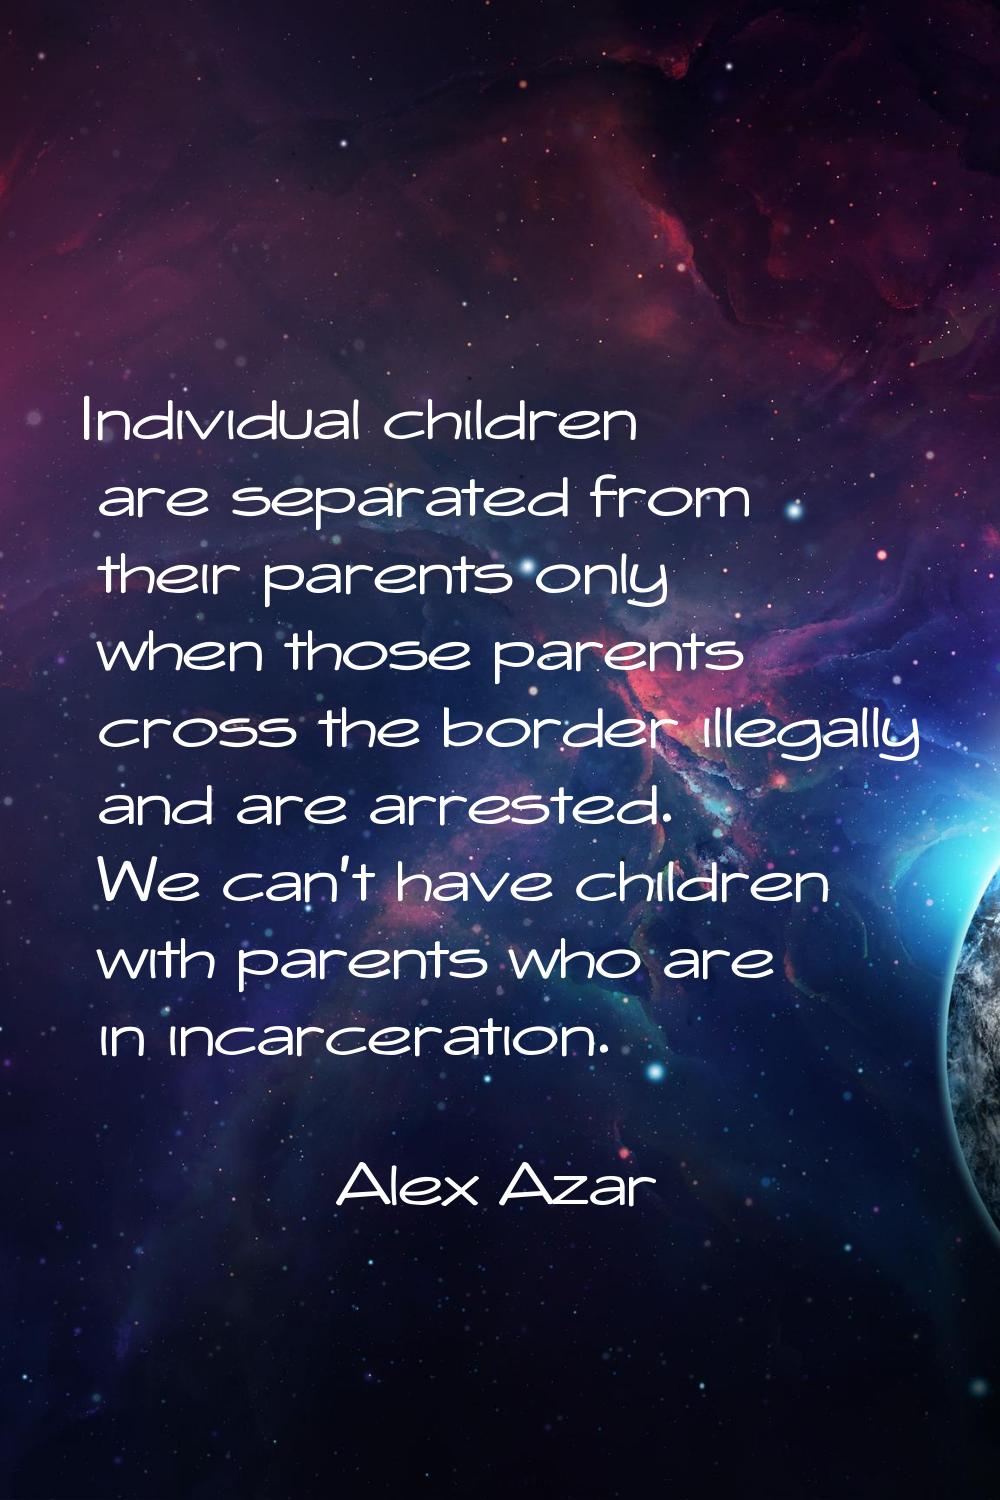 Individual children are separated from their parents only when those parents cross the border illeg